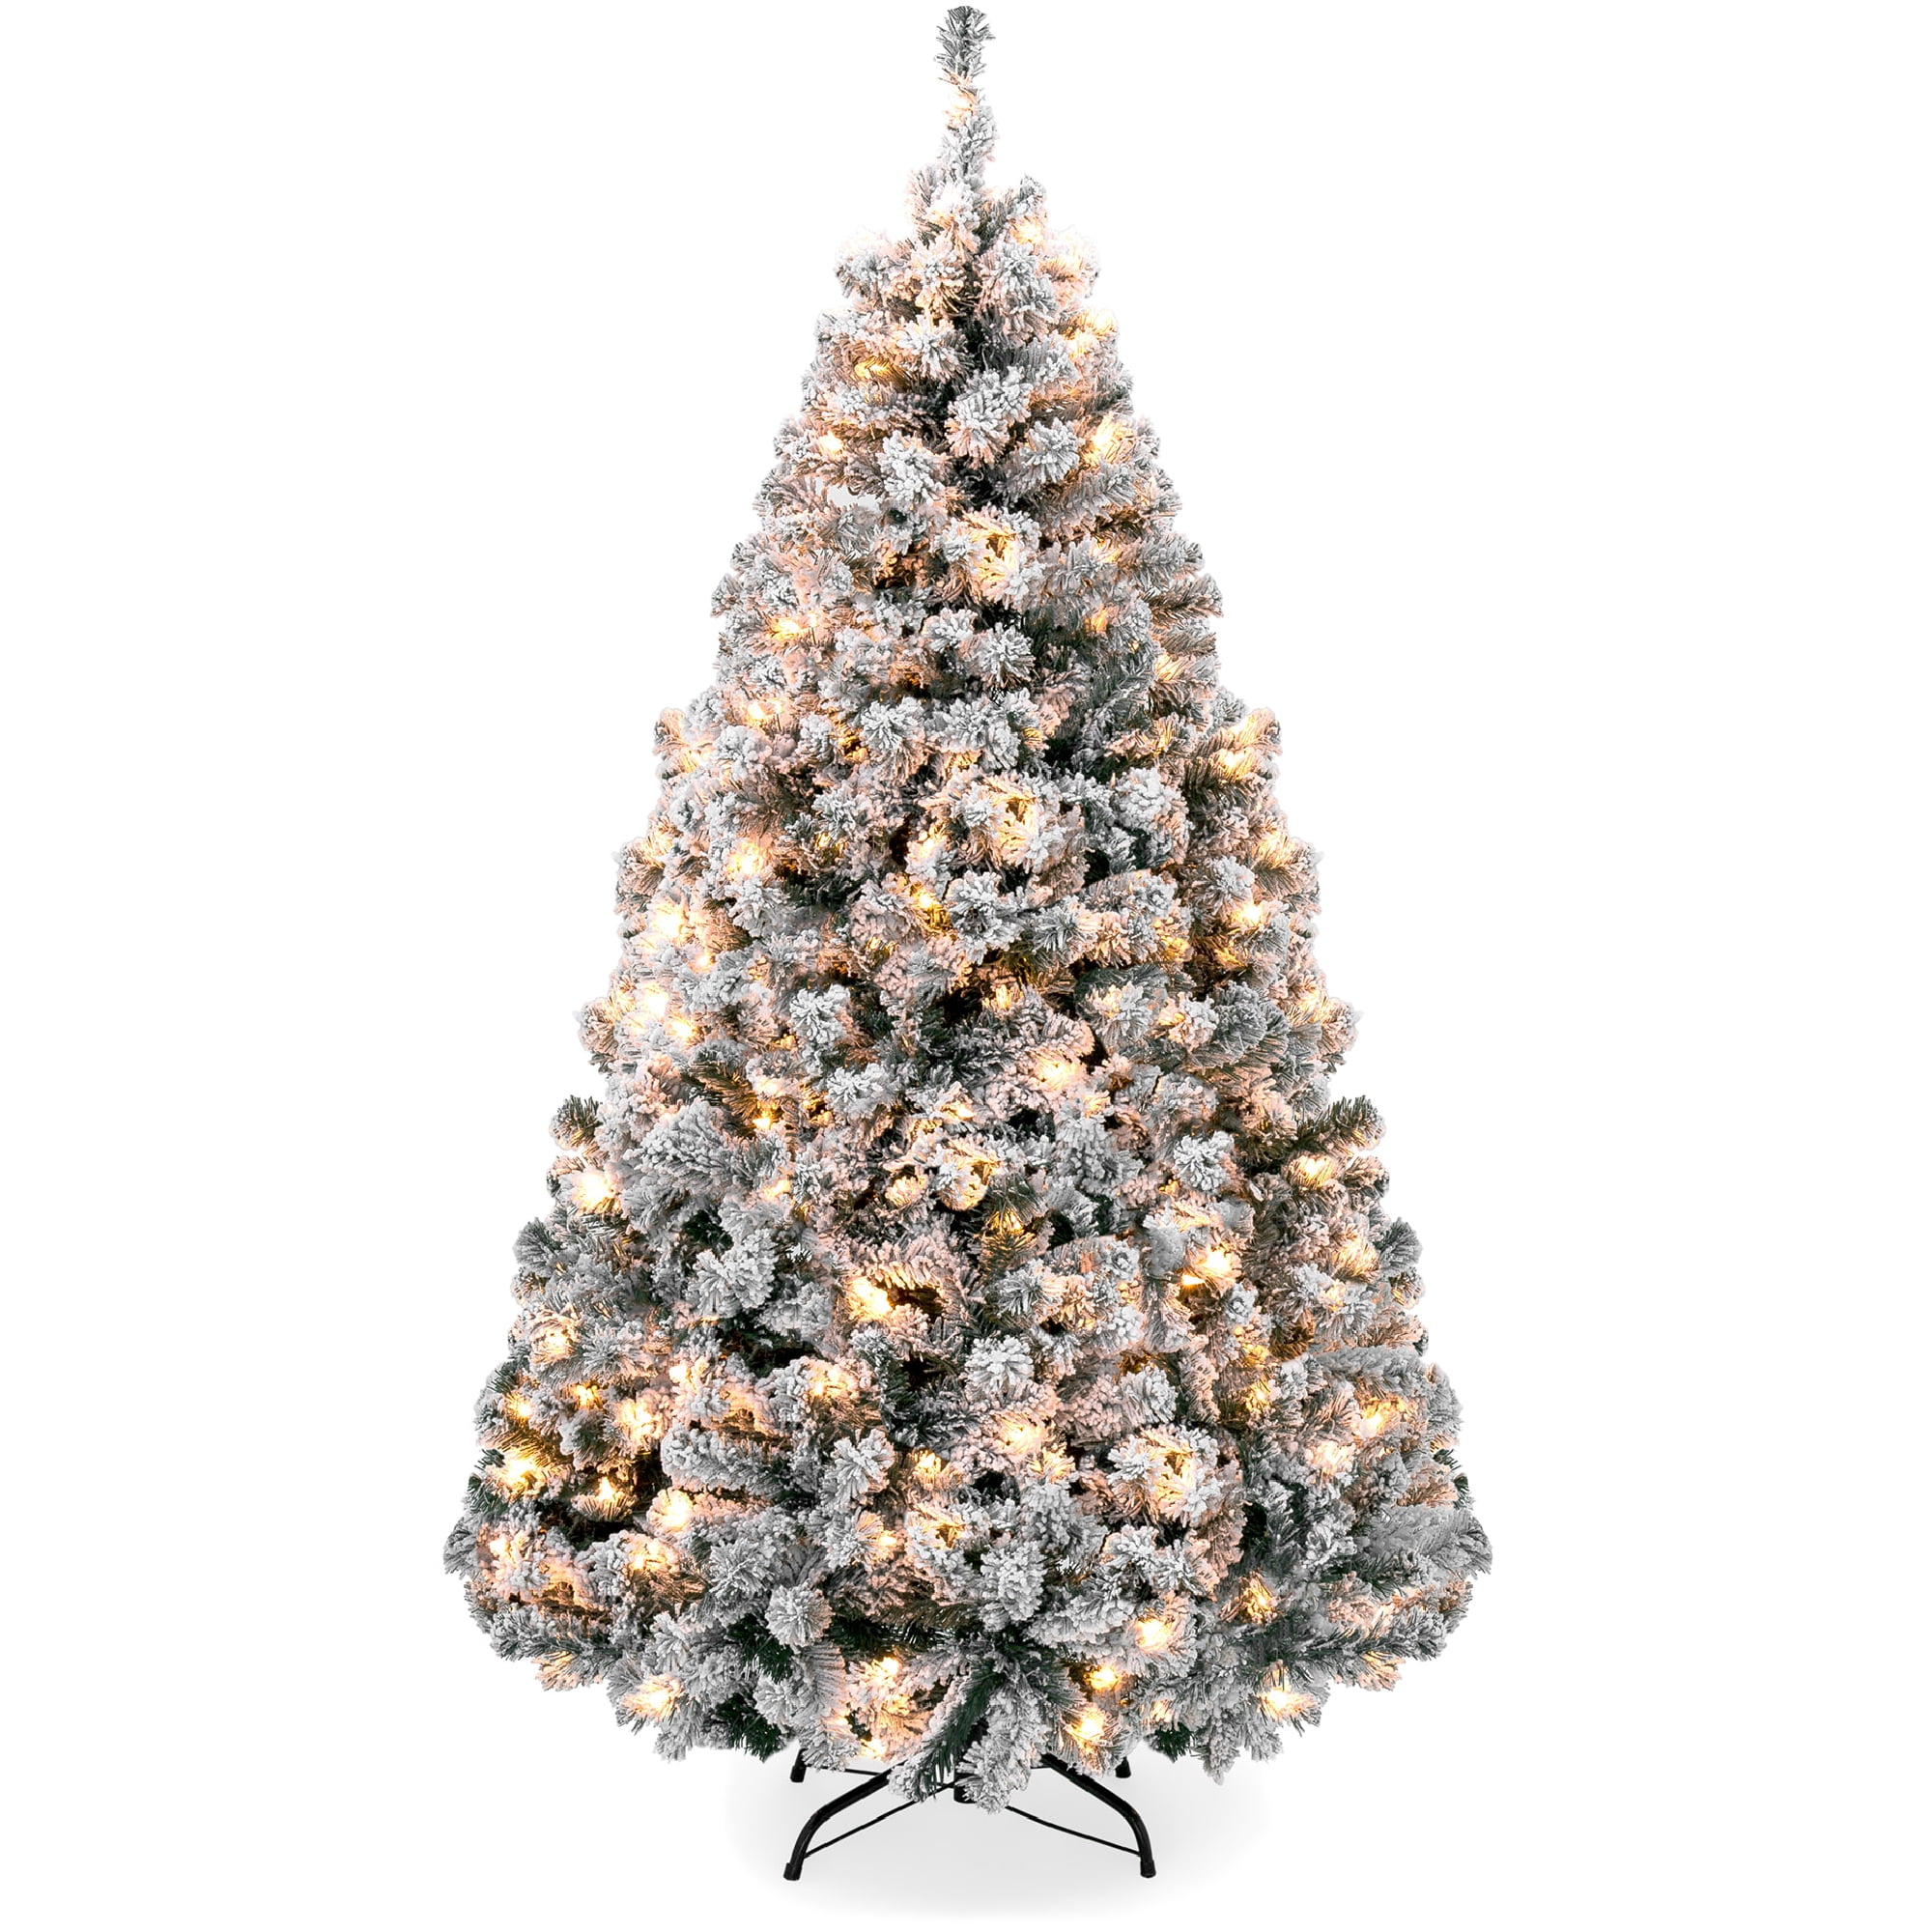 Best Choice Products 6ft Pre-Lit Holiday Christmas Pine Tree w/ Snow Flocked 250 Warm White Lights - Walmart.com